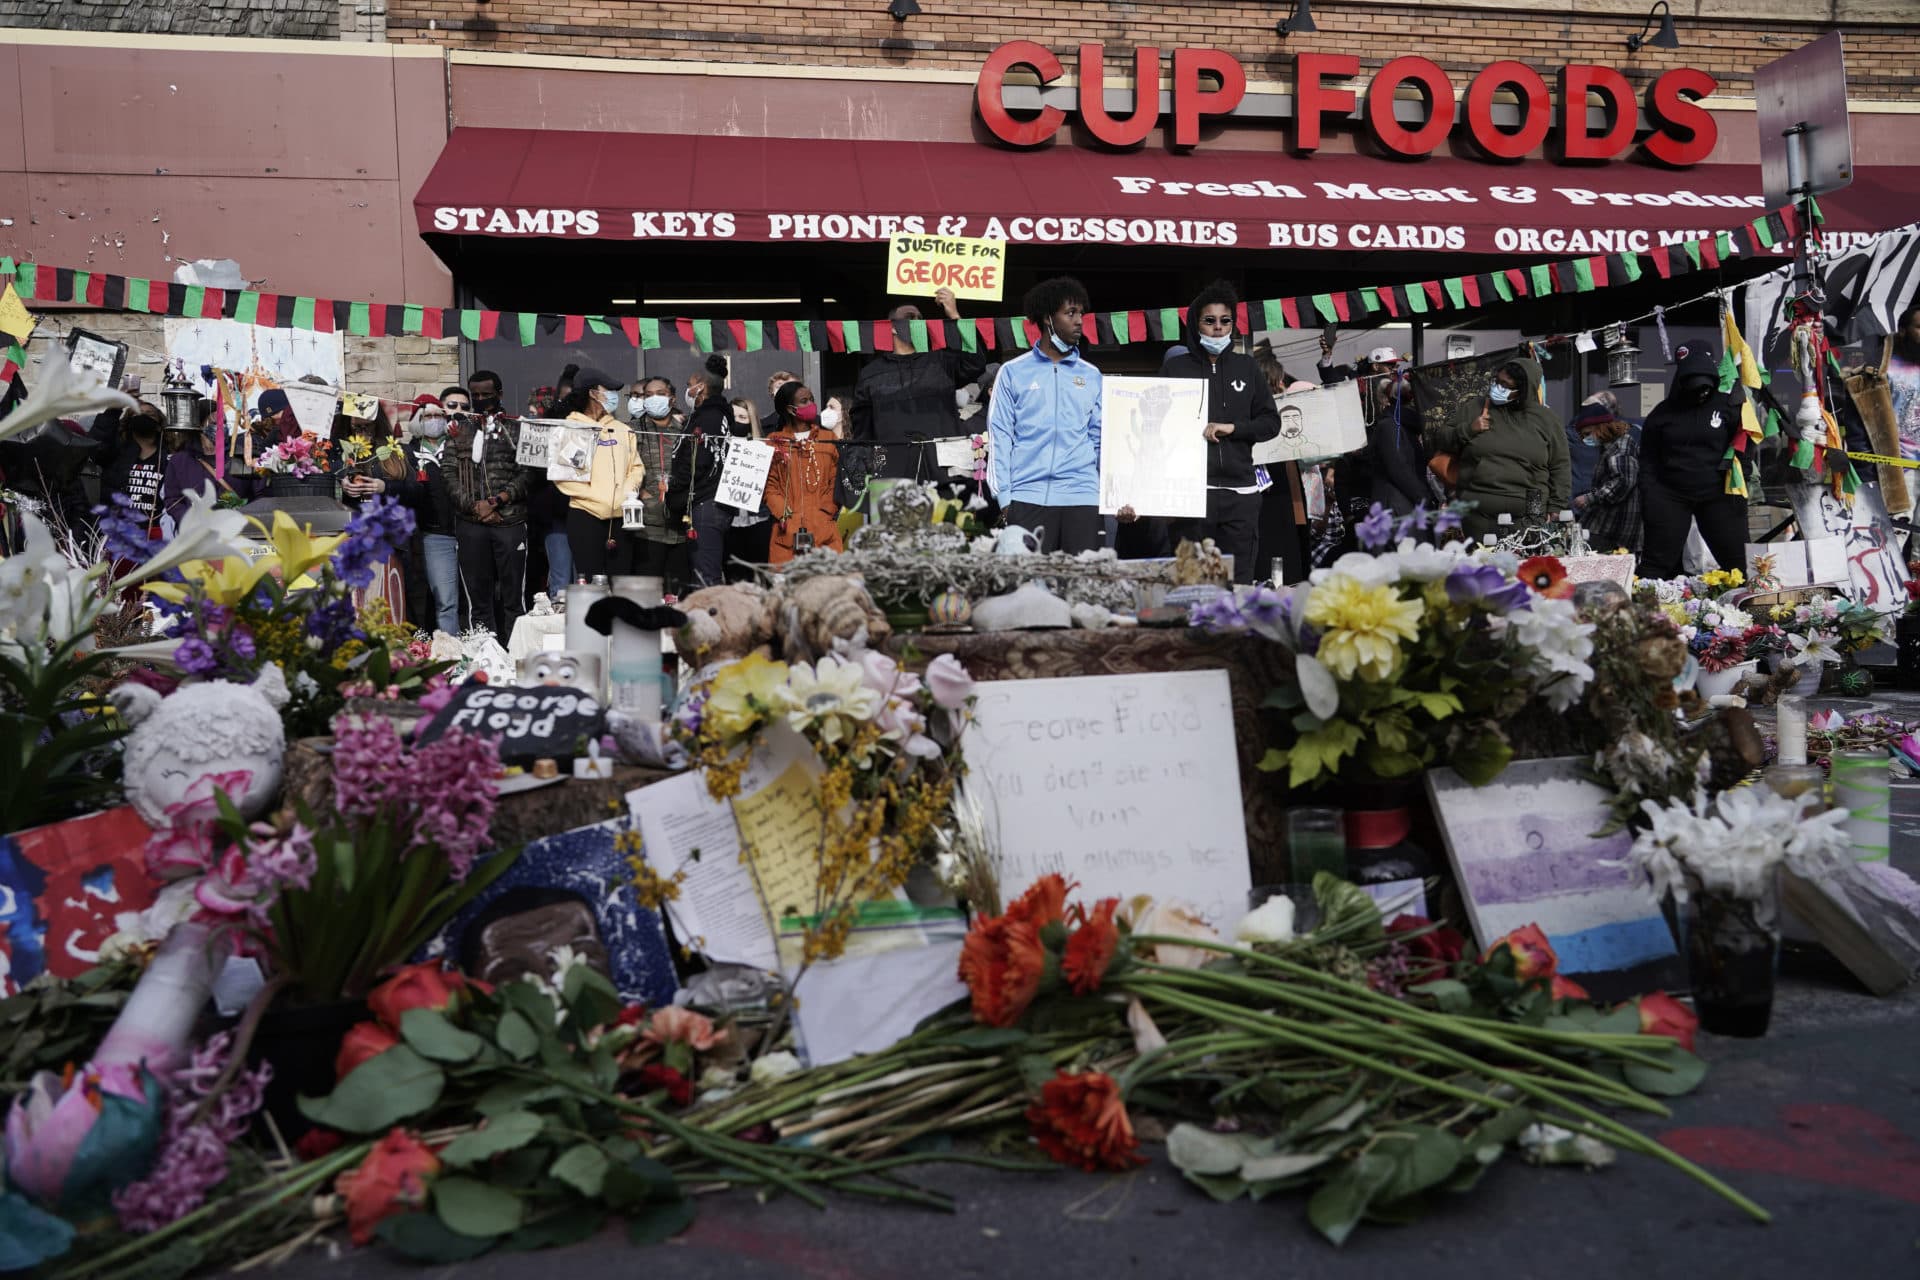 People gather at Cup Foods in Minneapolis after a guilty verdict was announced at the trial of former officer Derek Chauvin for the 2020 death of George Floyd. (Morry Gash/AP)